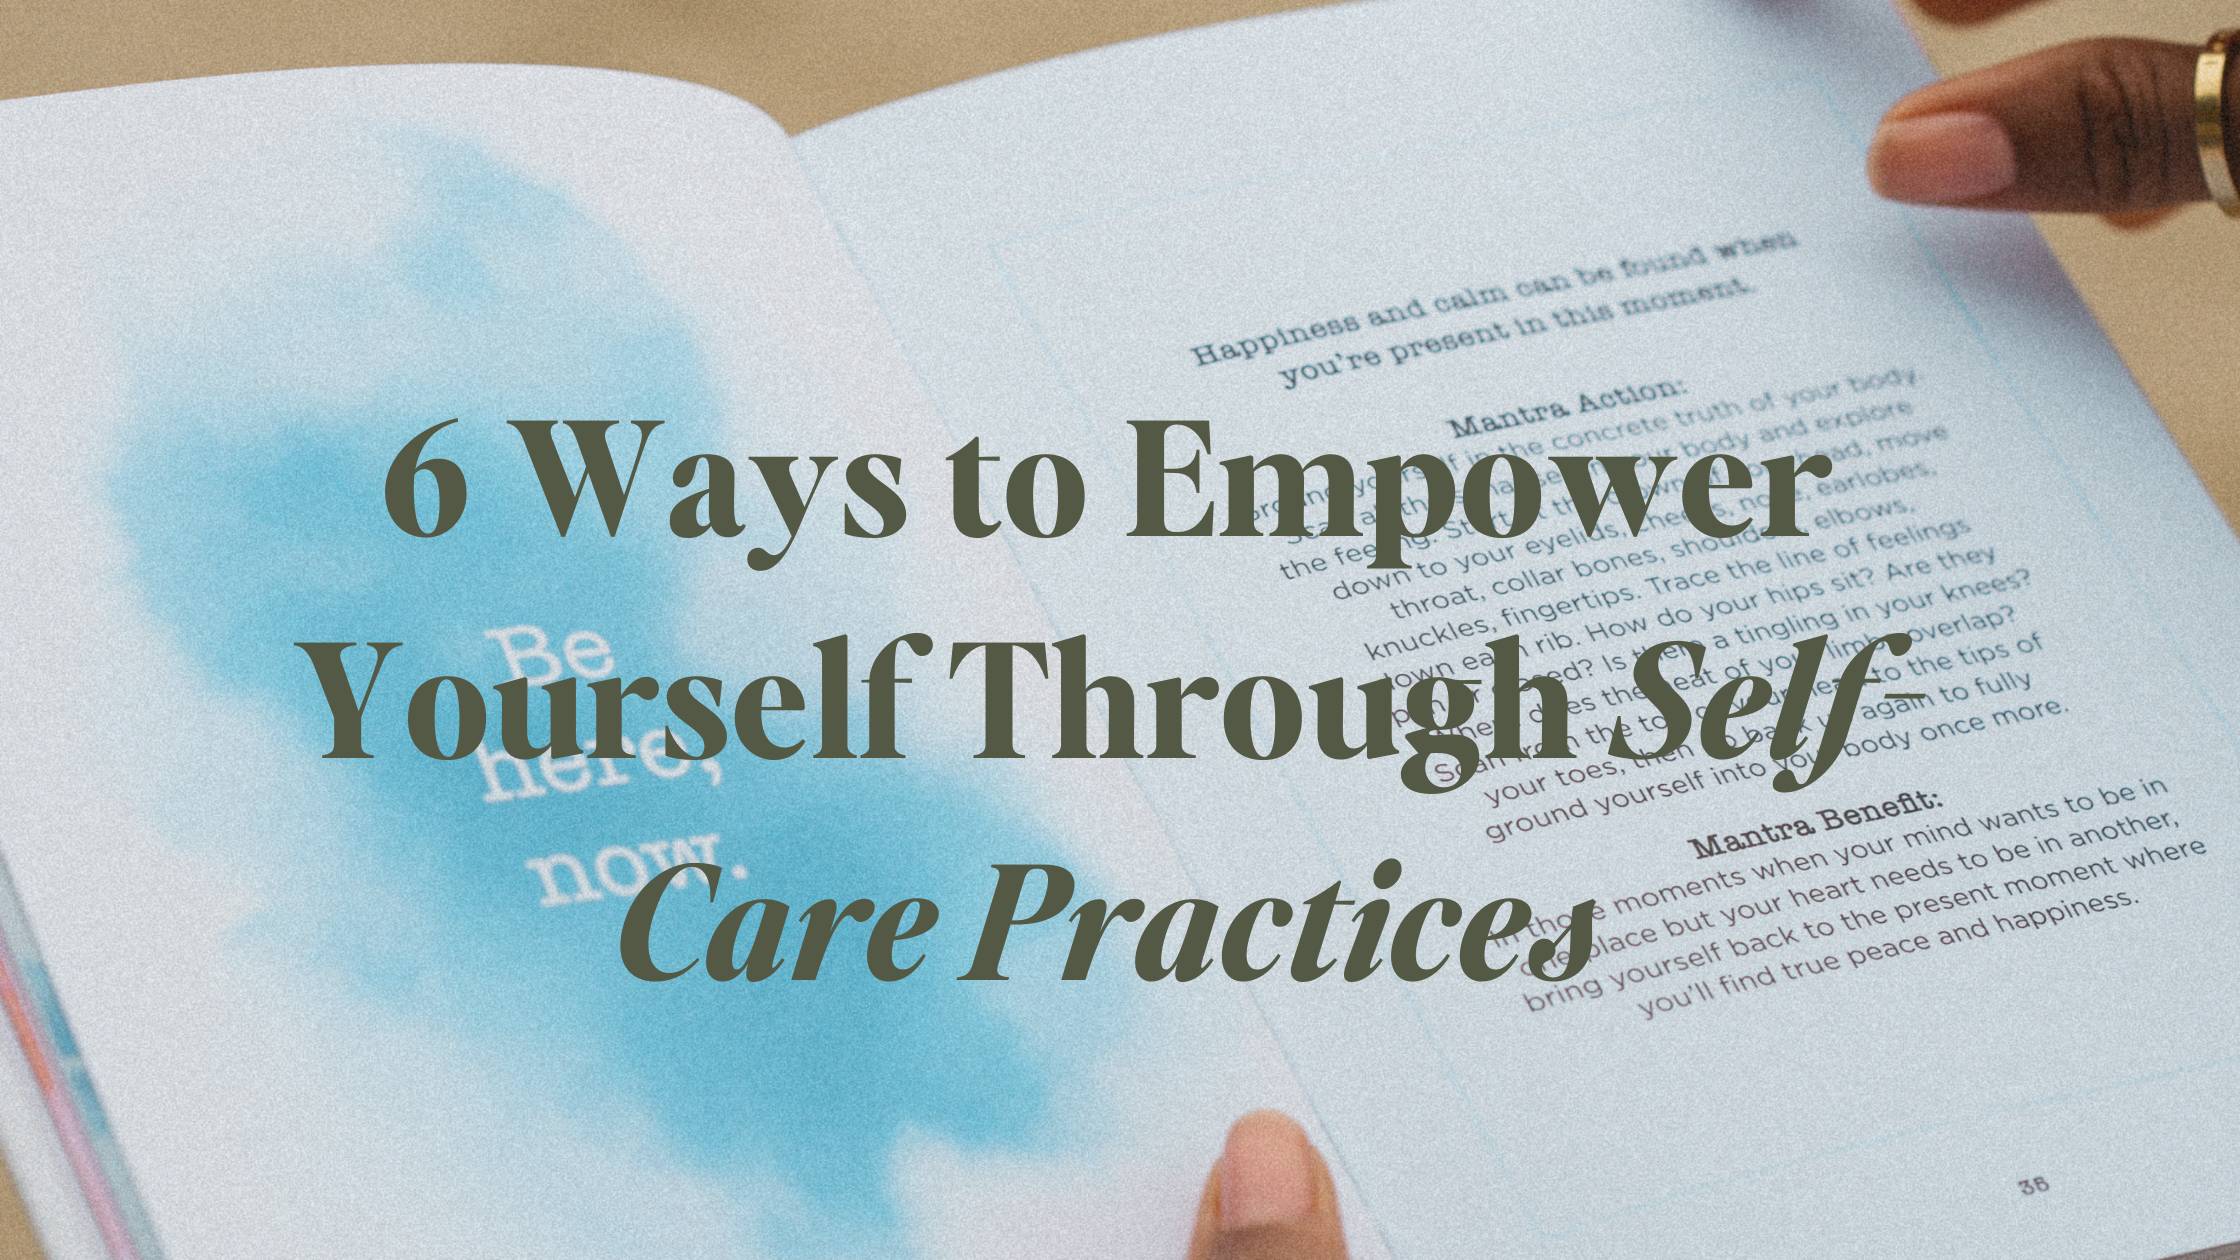 6 Ways to Empower Yourself Through Self-Care Practices